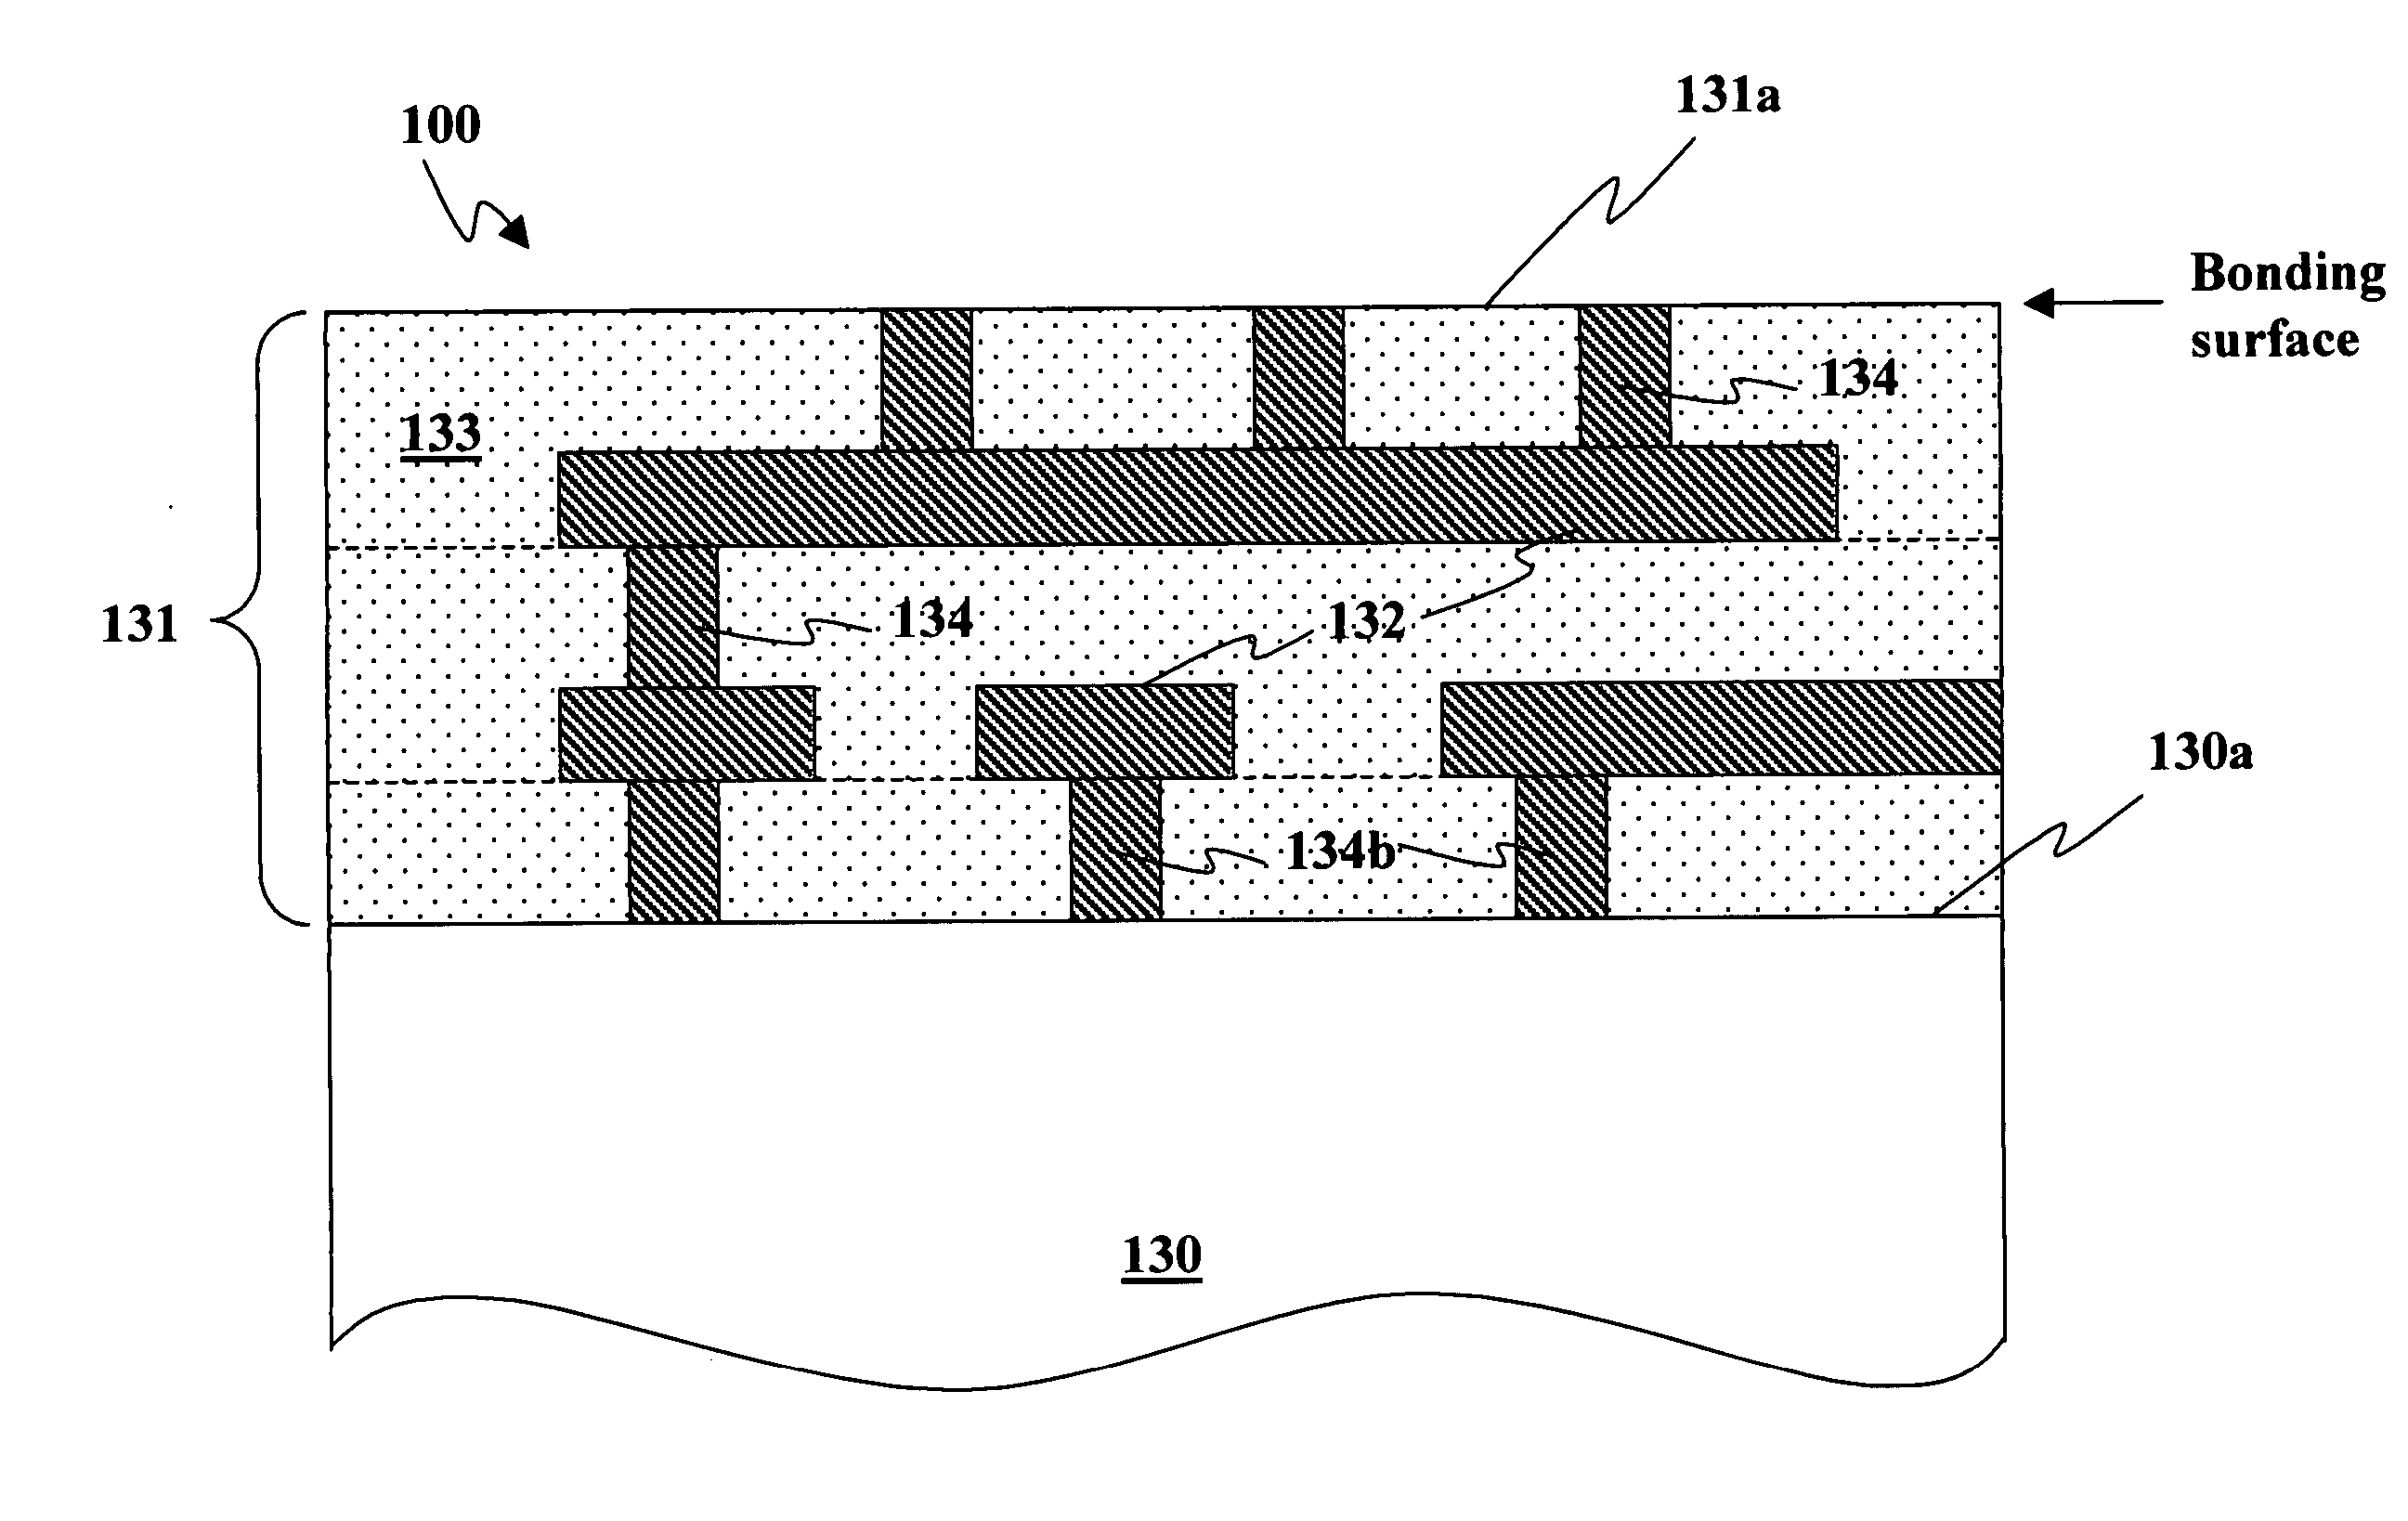 Semiconductor bonding and layer transfer method